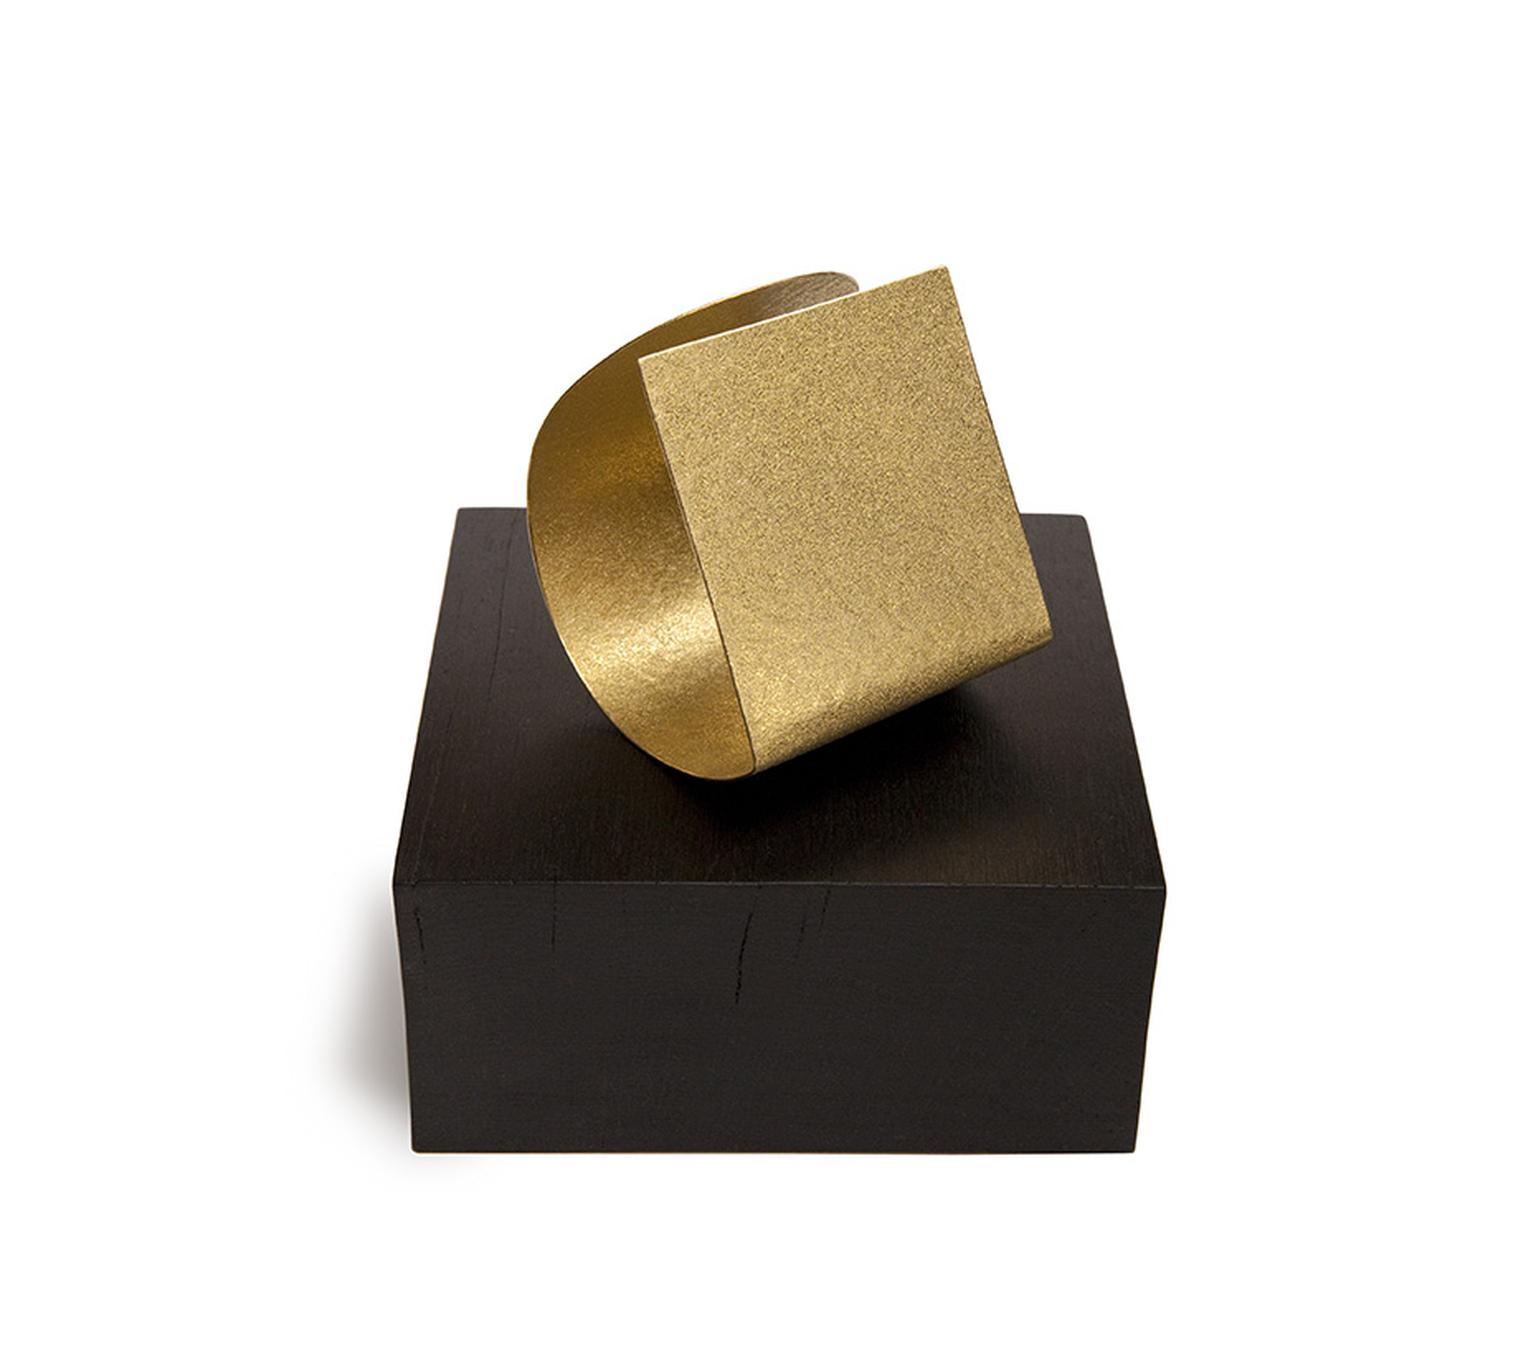 Ute Decker 'Squaring the Circle' minimalist arm piece in Fairtrade gold